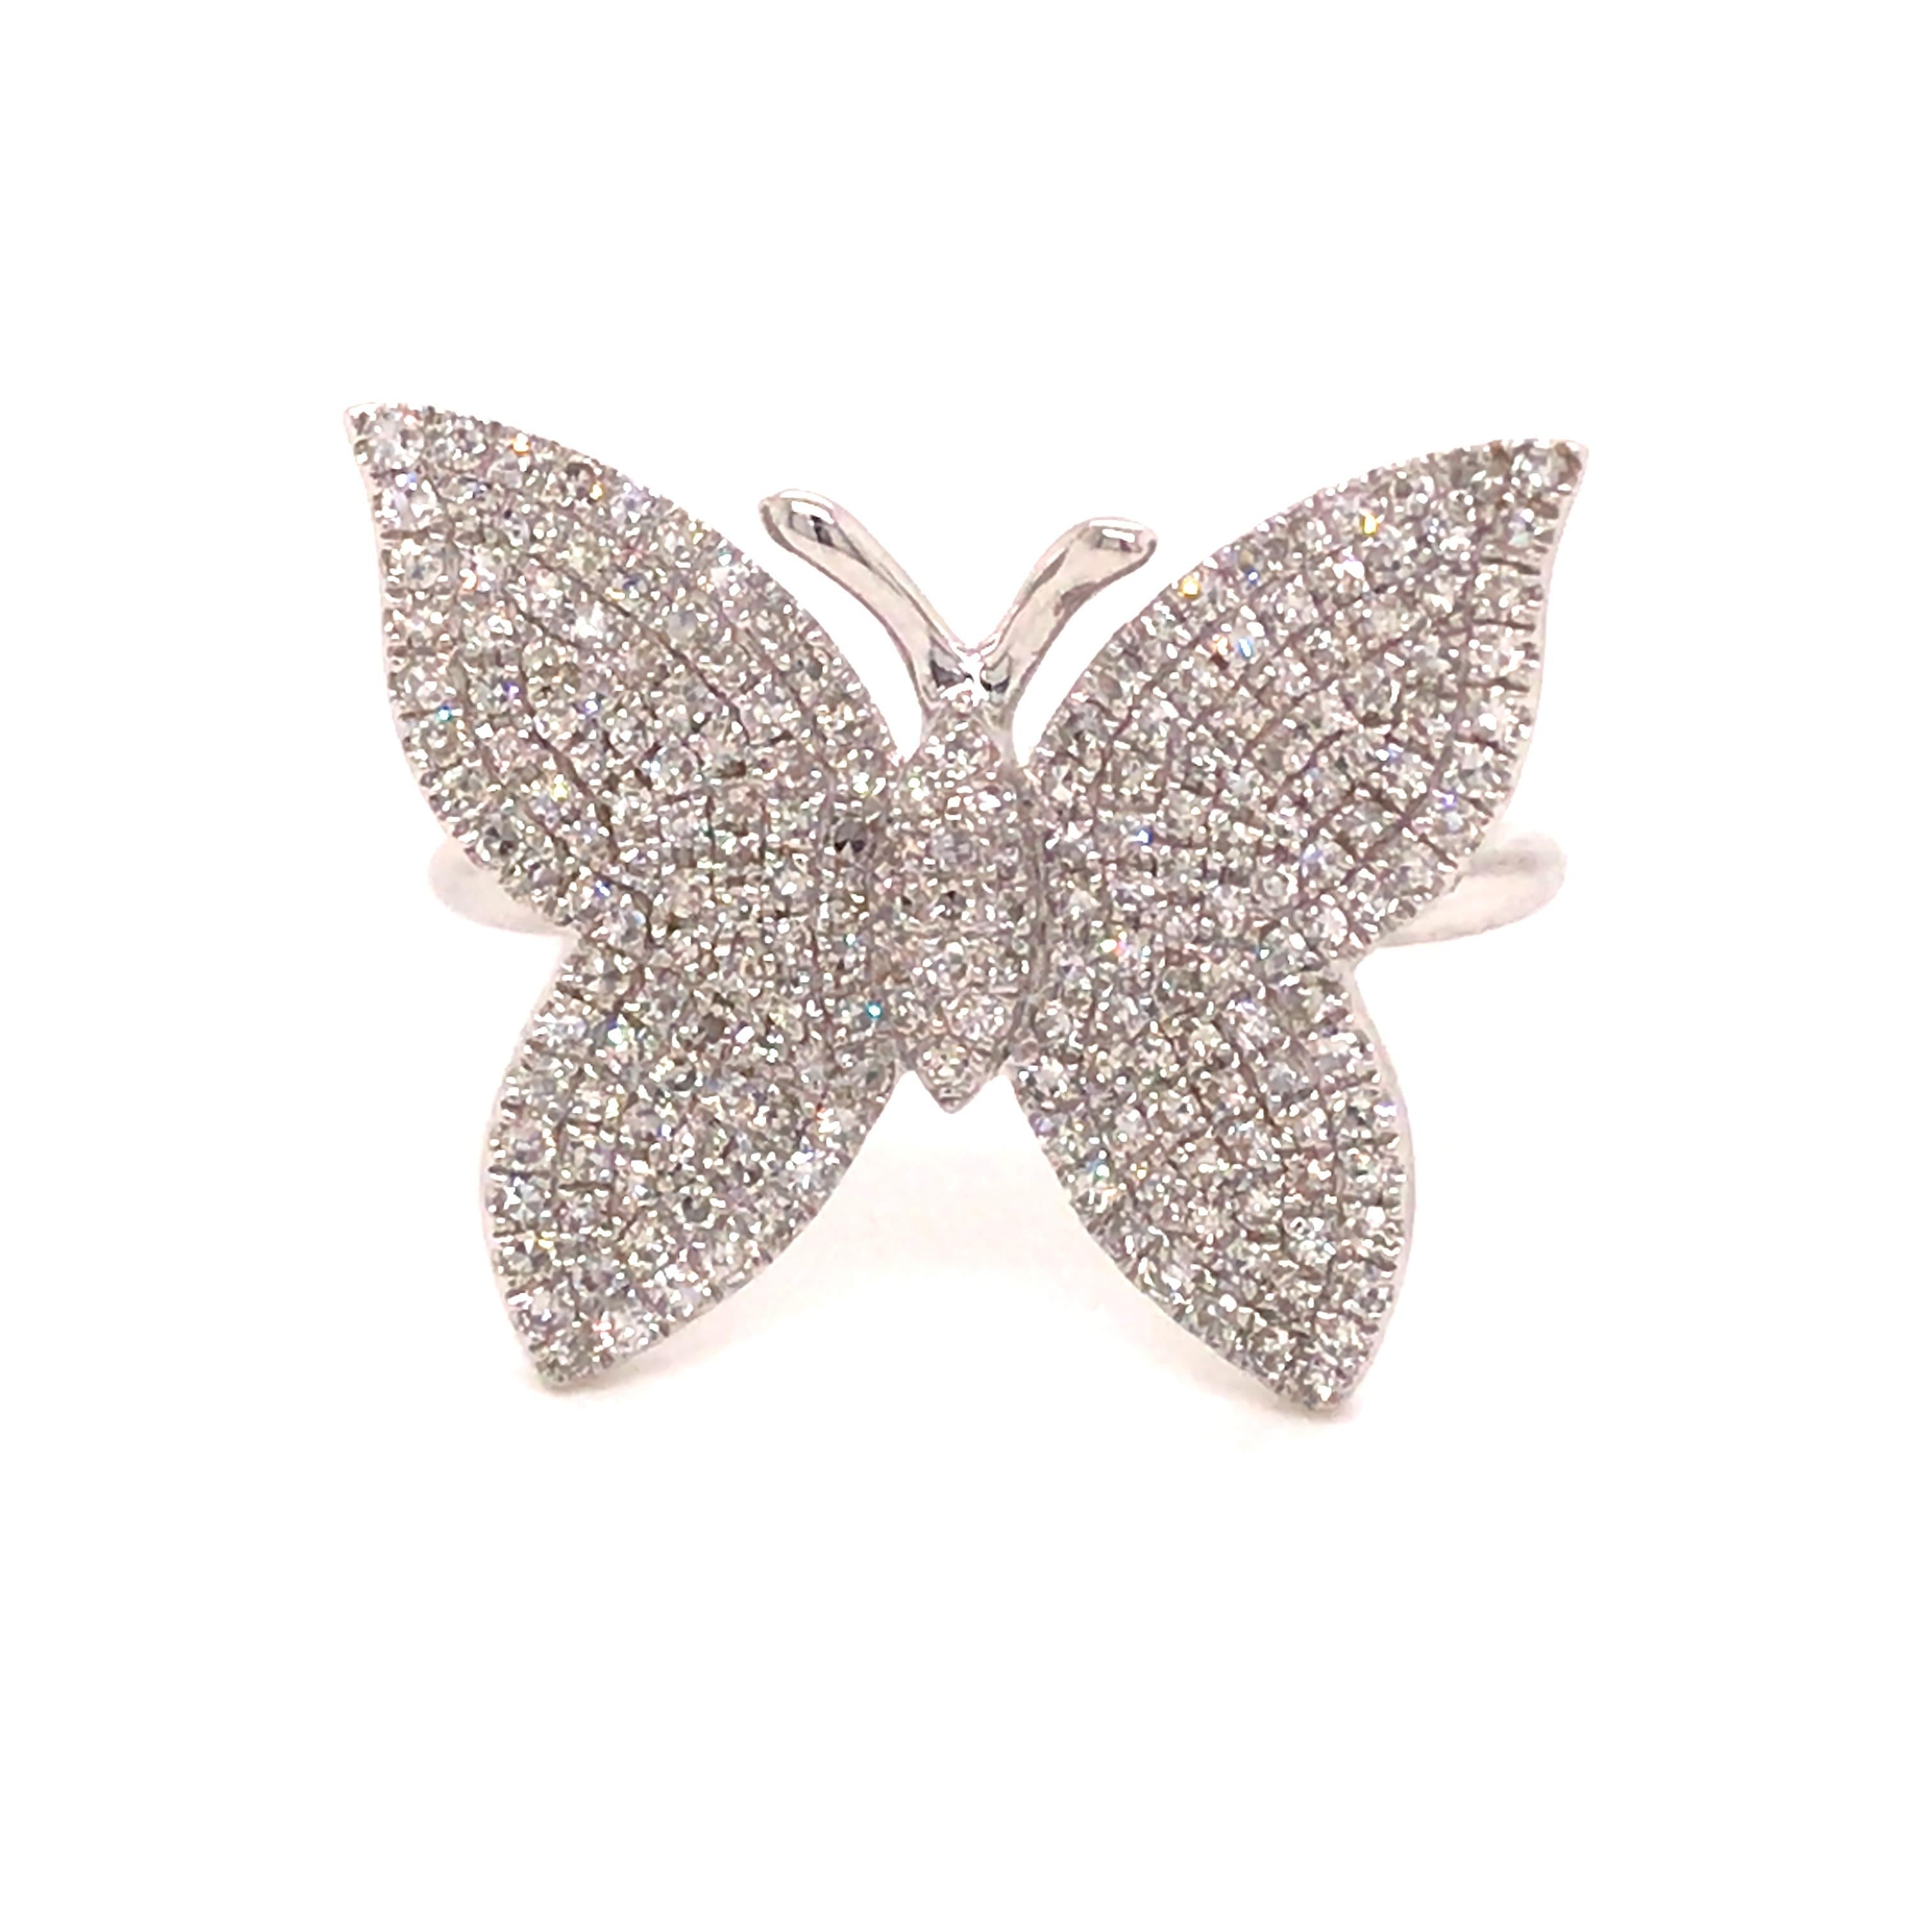 Pave Diamond Butterfly Ring in 14K White Gold.   Round Brilliant Cut Diamonds weighing 0.52 carat total weight, G-H in color and VS-SI in clarity are expertly set.  The Ring measures 3/4 inch in length and 5/8 inch in width.  Ring size 6 3/4.  4.33